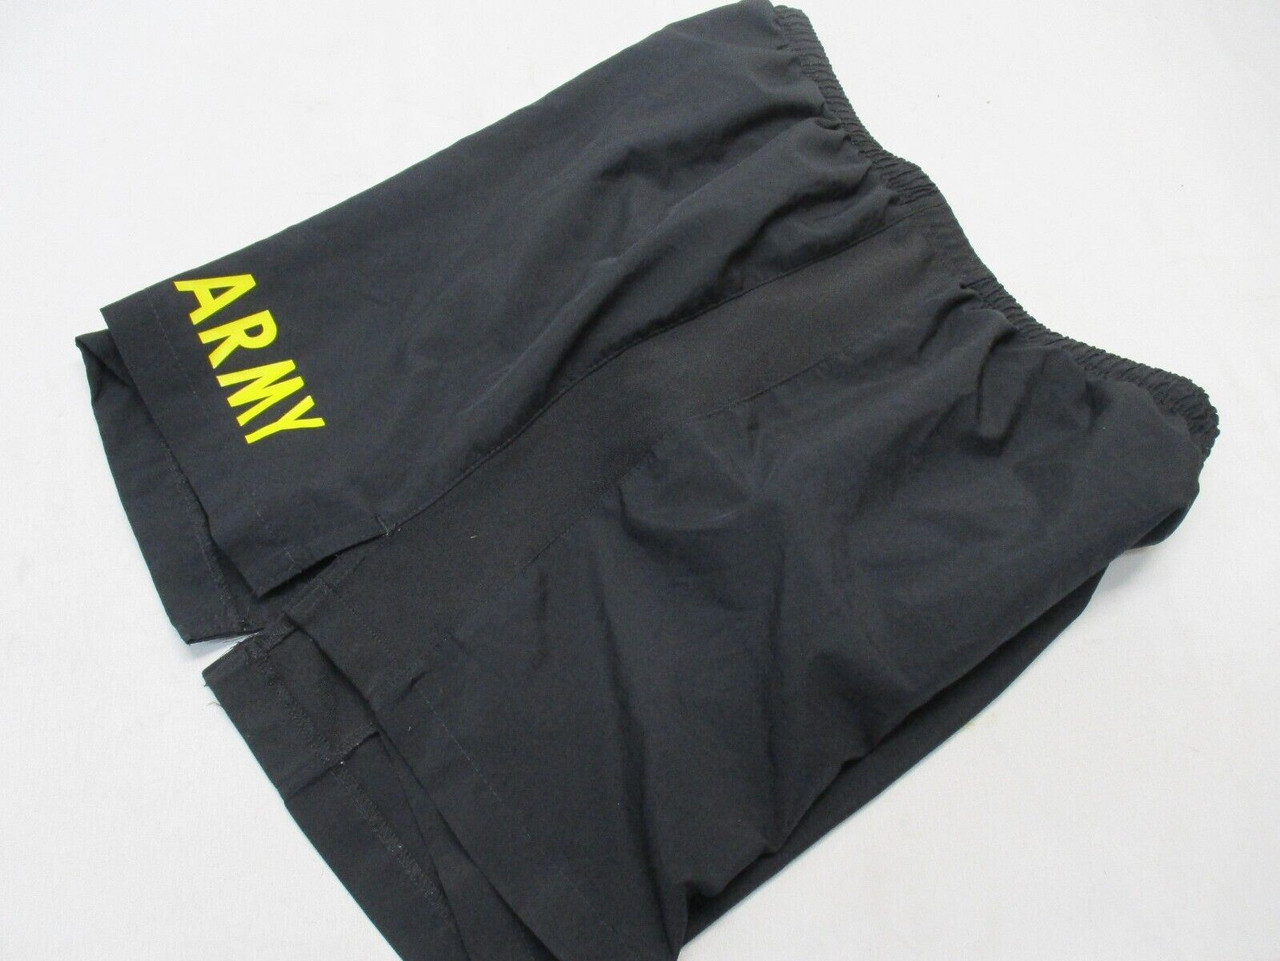 US ARMY ISSUE PT SHORTS w. BRIEF SWIM TRUNK LINER PHYSICAL FITNESS UNIFORM SHORT